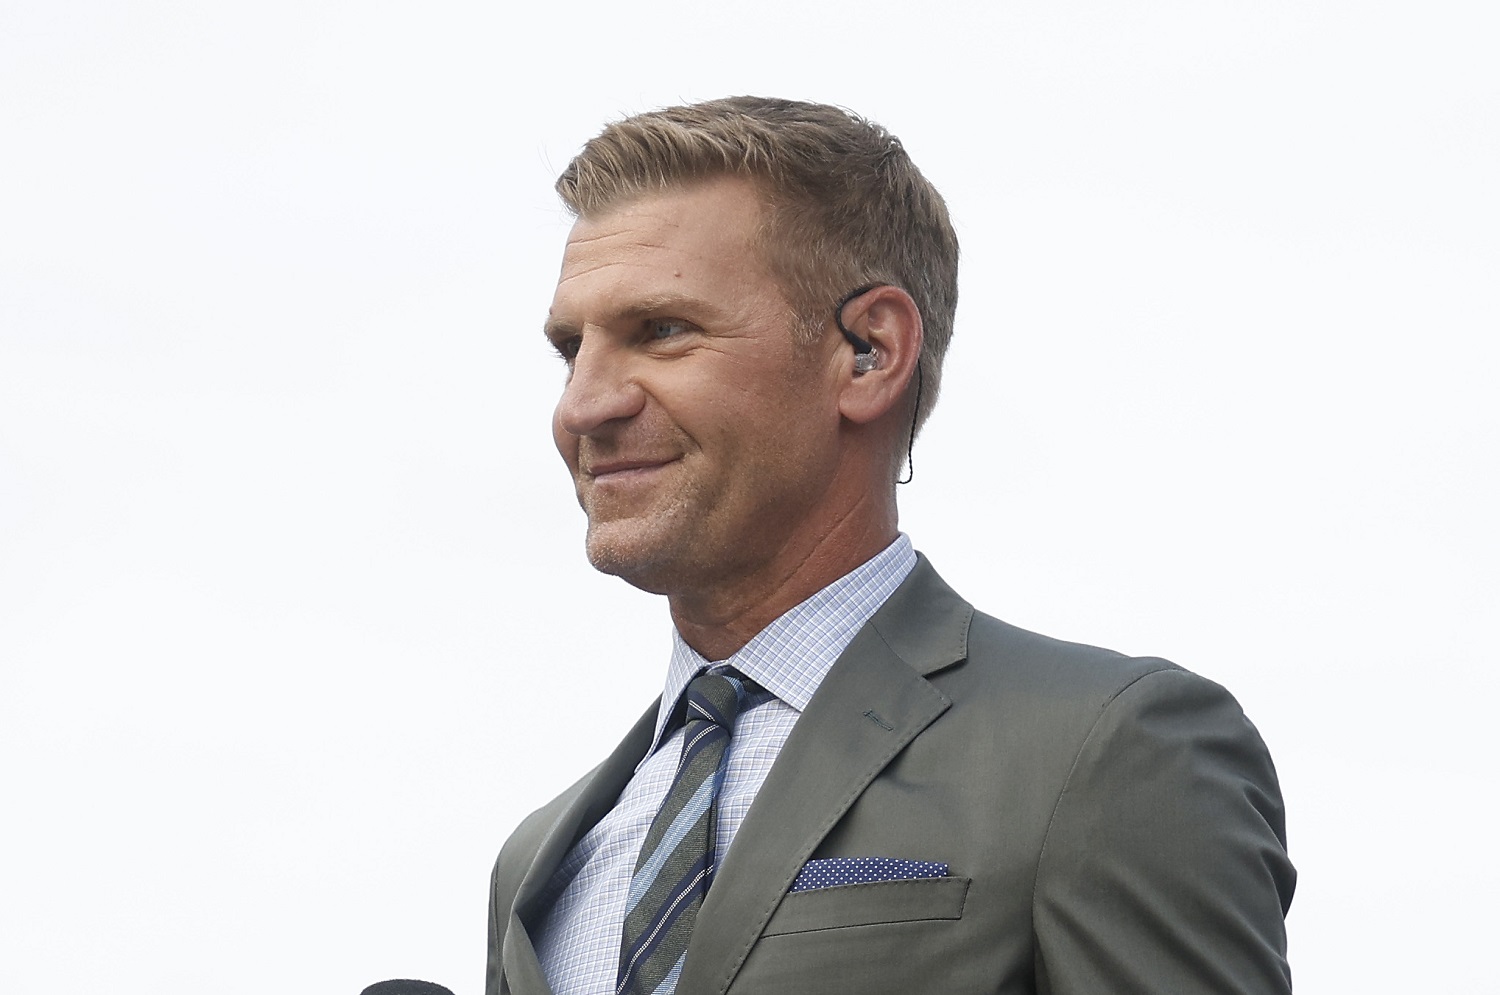 Clint Bowyer’s Absence From Fox’s Final NASCAR Cup Series Telecast Followed Fatal Accident